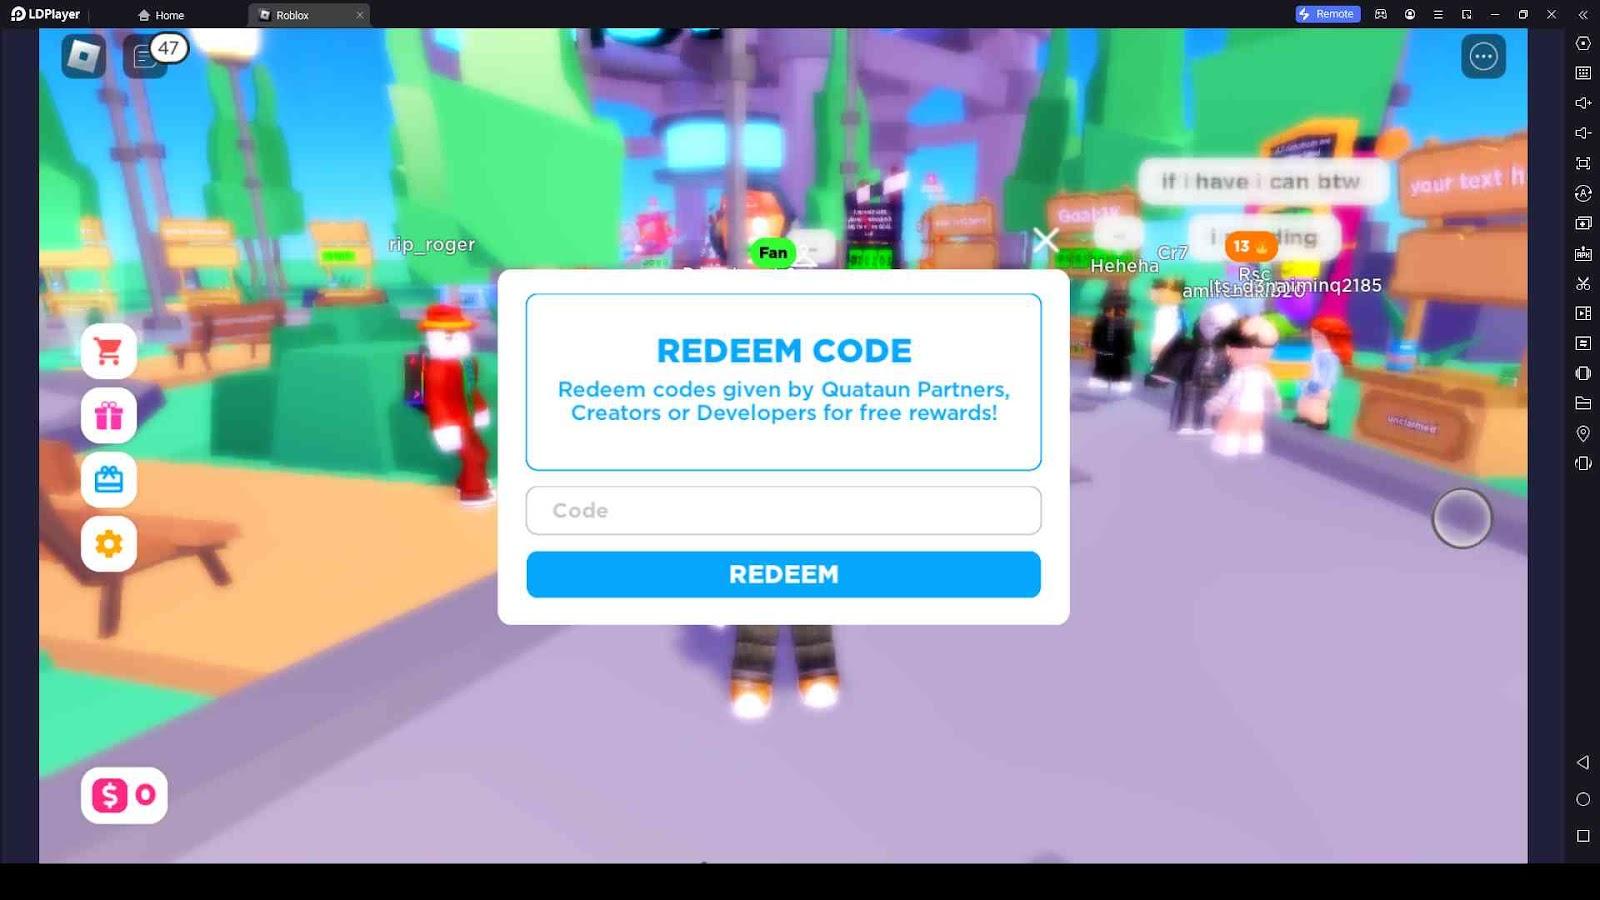 Roblox Pls Donate Codes Guide for Players of Roblox - December